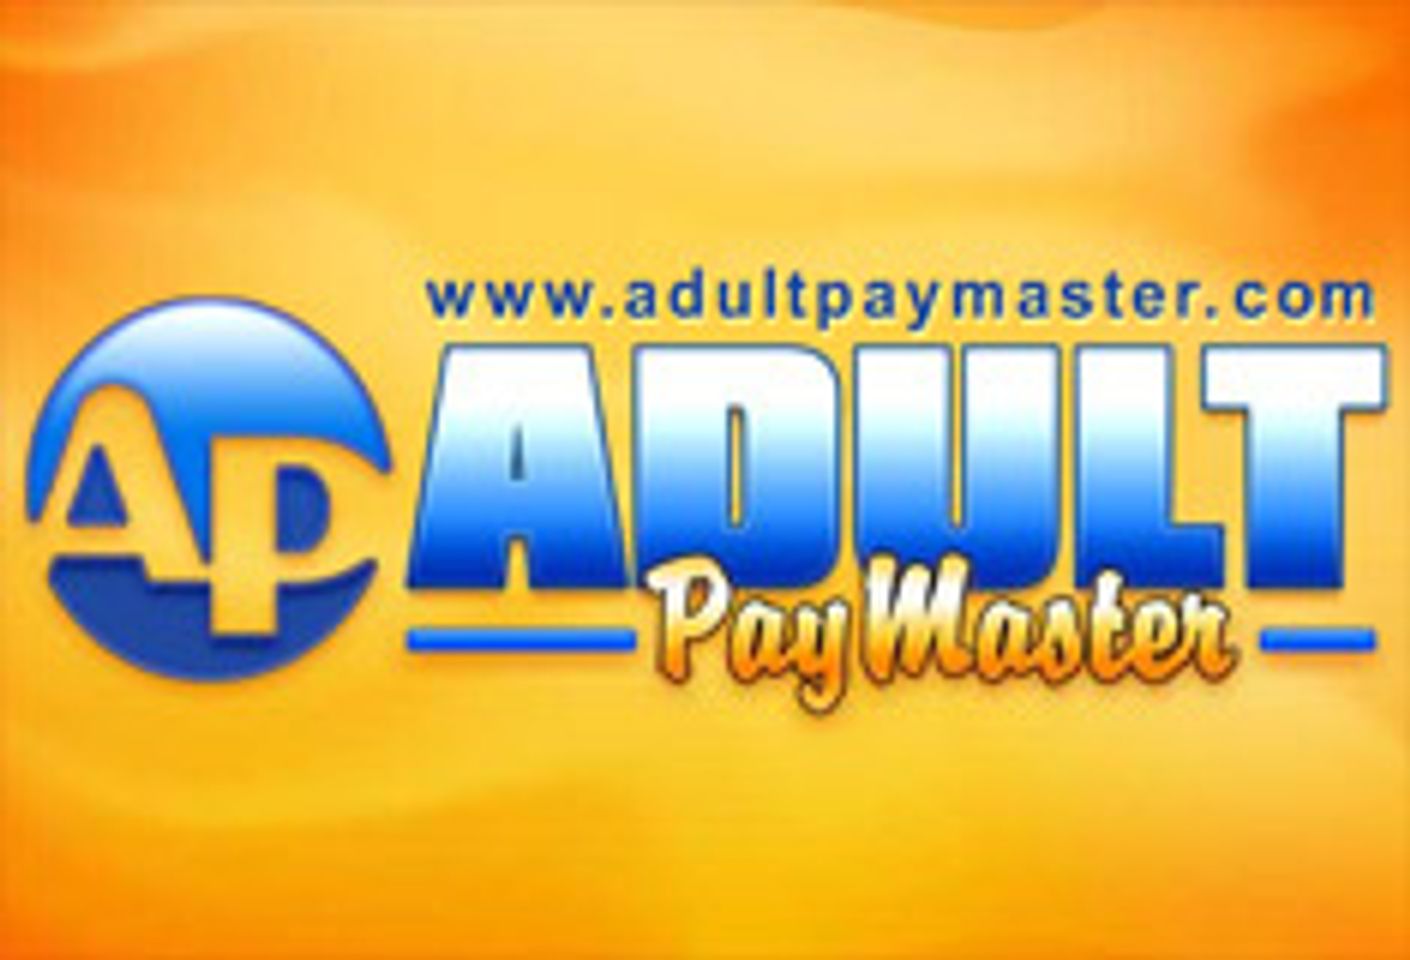 Adult PayMaster Launches Four Sites